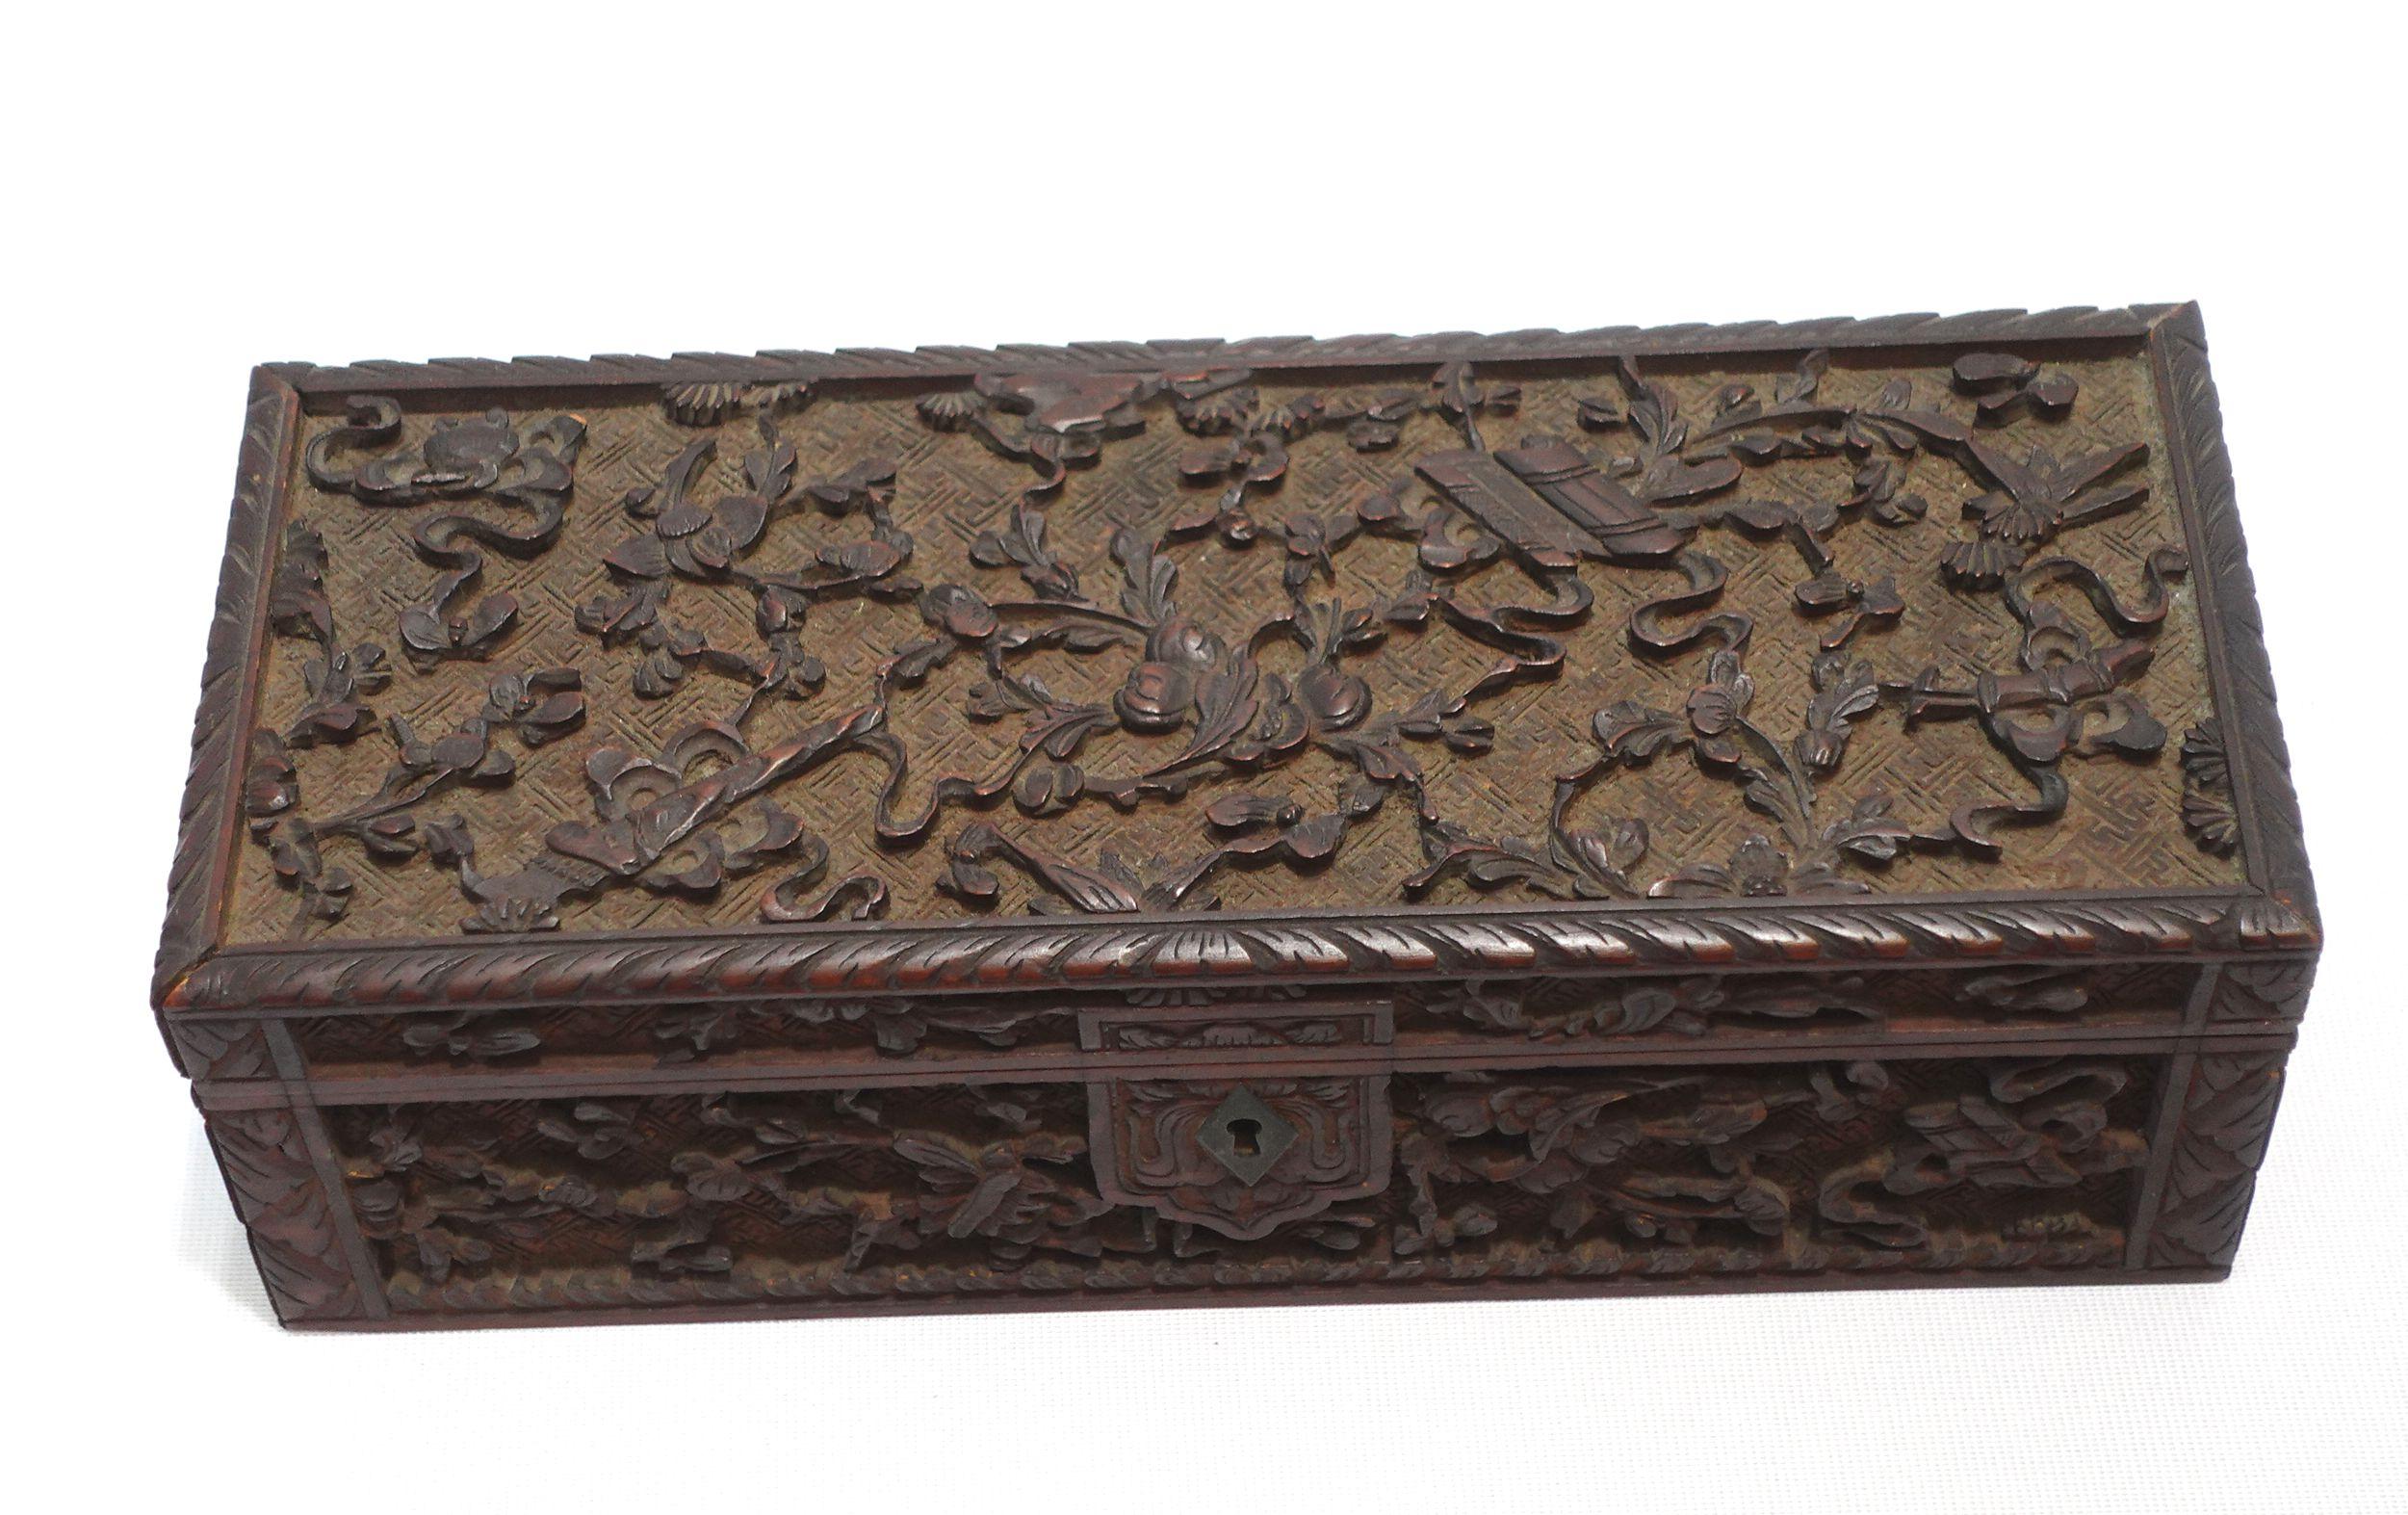 Chinese elaborately Relief carved glove box with original hinges and lock, no key, no damage or cracks, 
9 ¾” w. x 3 ¾” d x 3” h. 

Notes: Very good condition

 